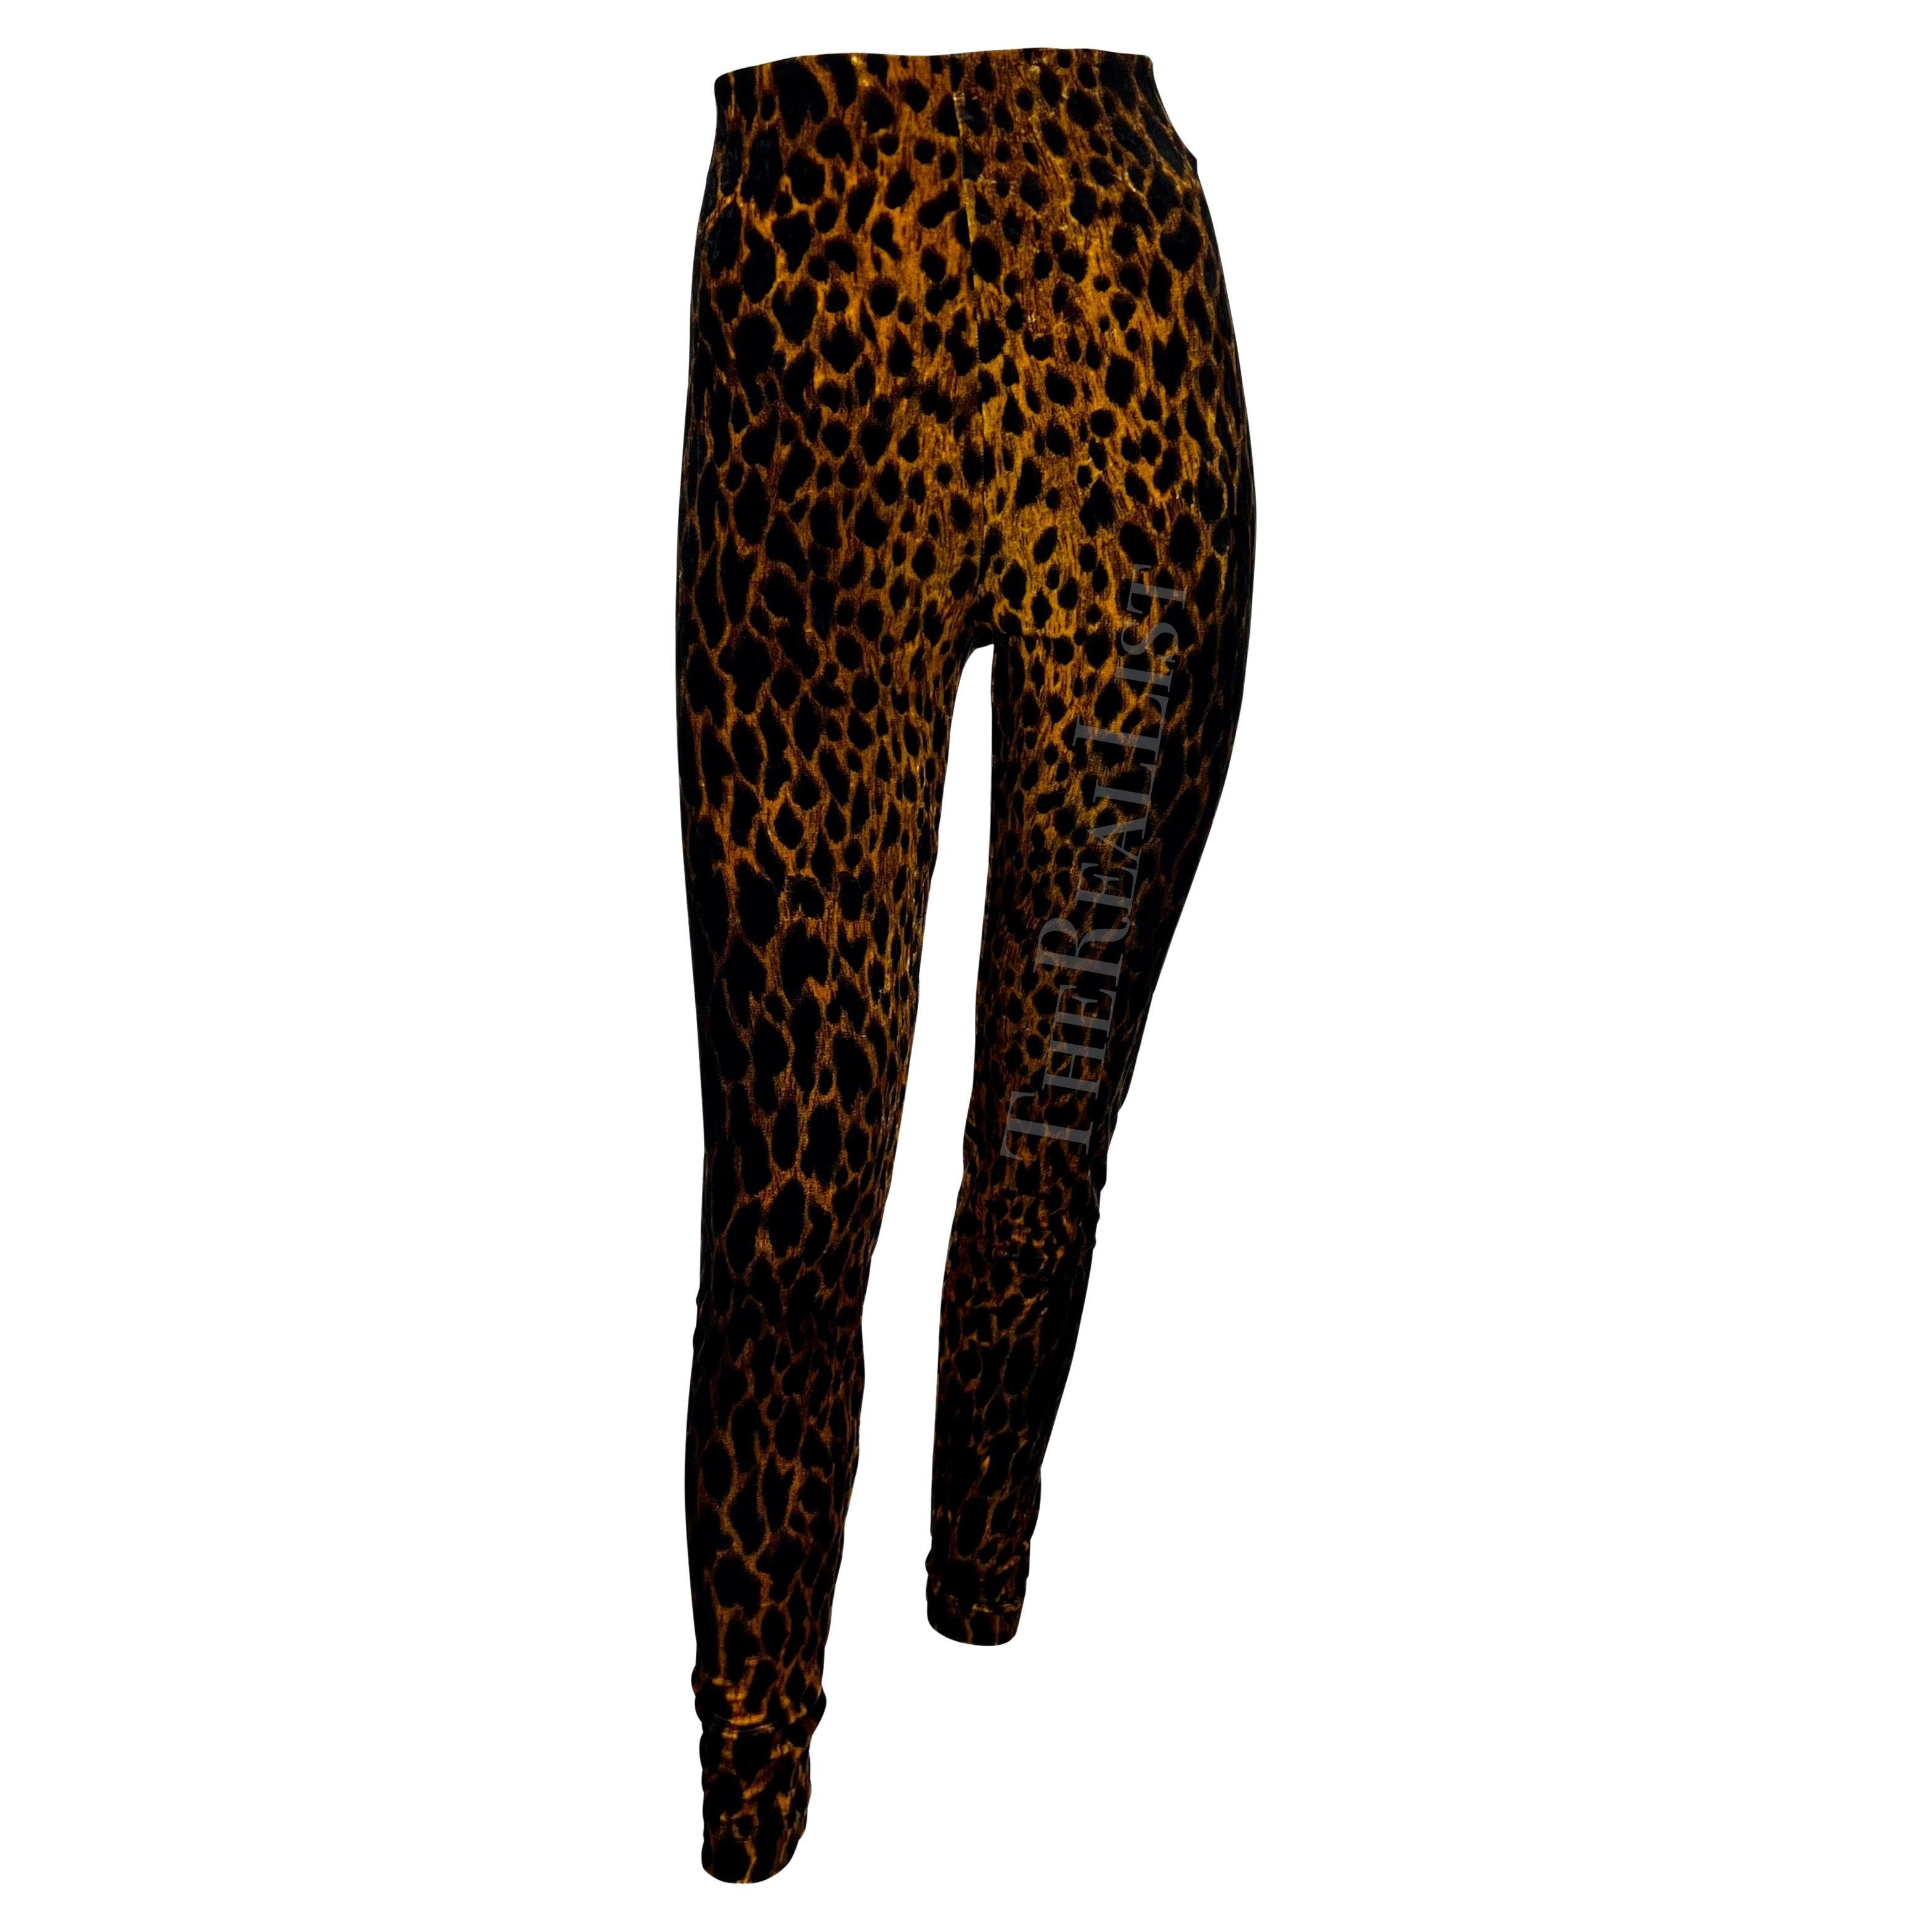 F/W 1992 Gianni Versace Couture Brown Cheetah Print Velvet Pant Set For Sale 2